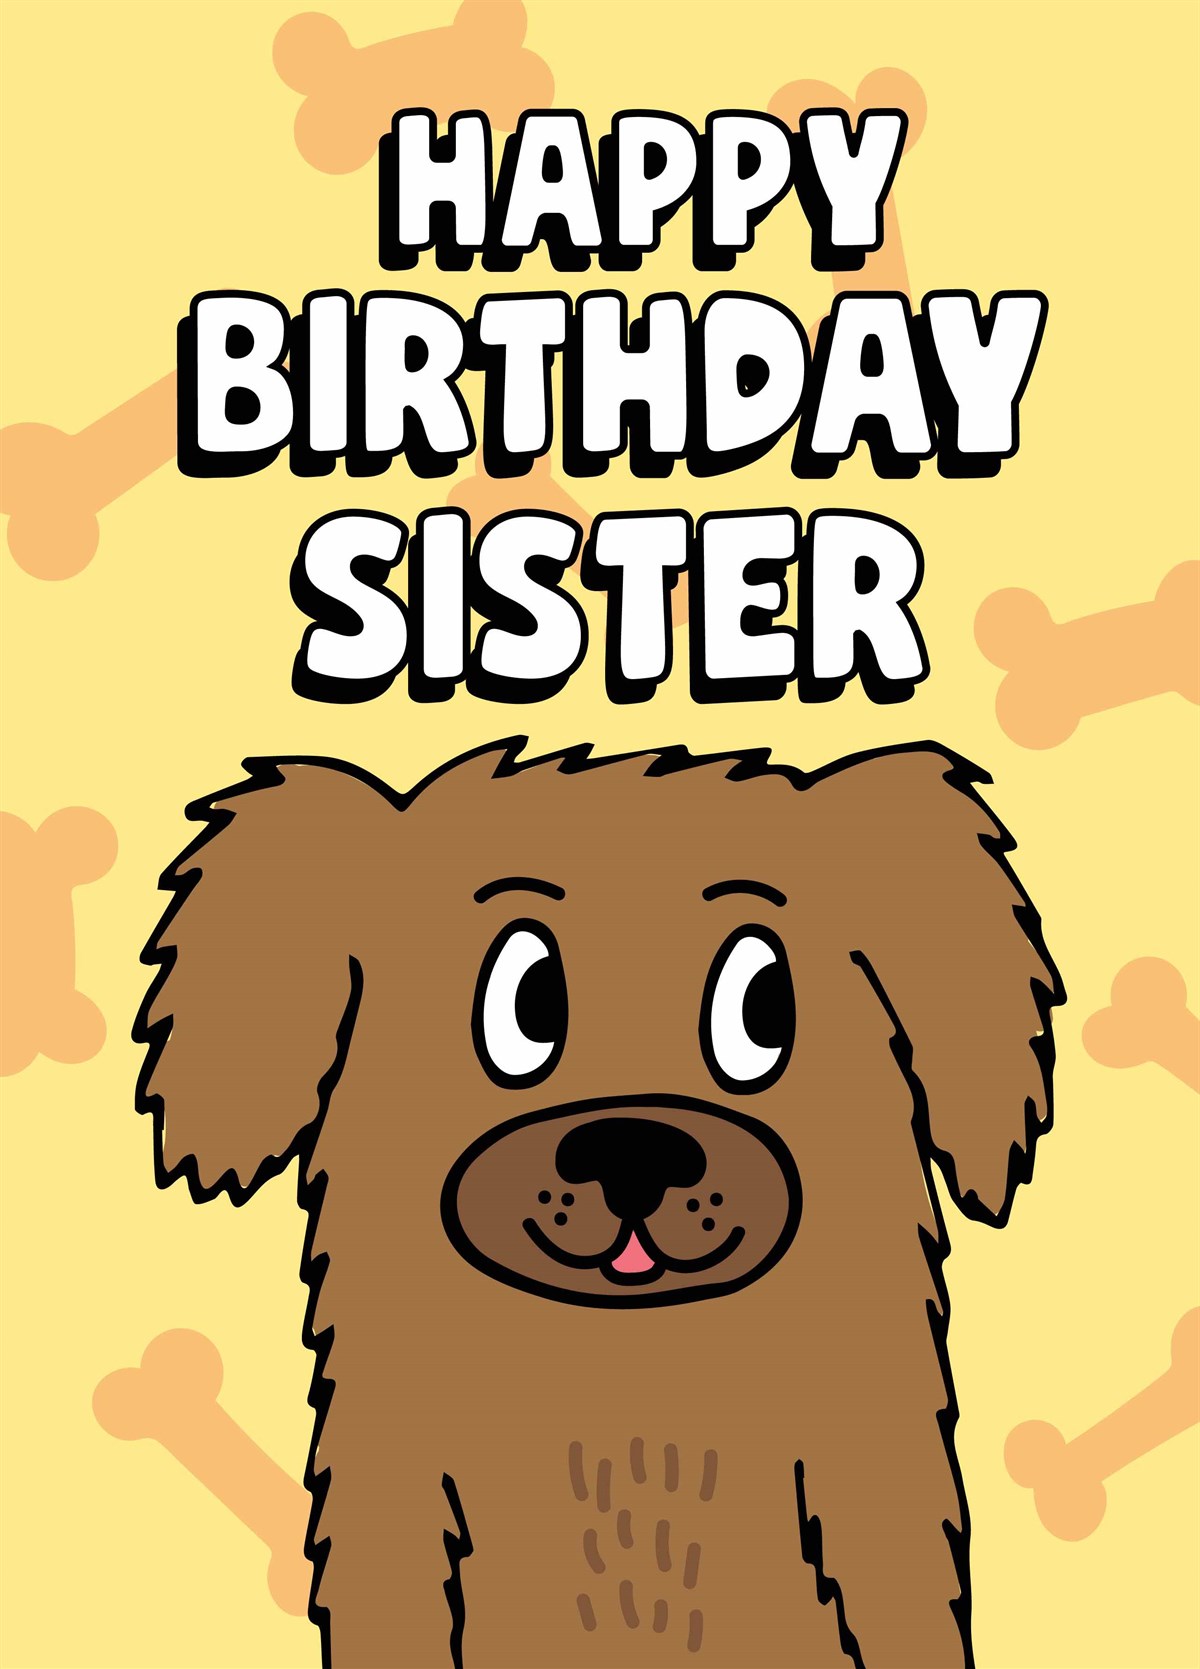 Sister Daughter Son Brother etc Personalised Kipper the Dog Birthday Card  Home & Garden Greeting Cards & Party Supply